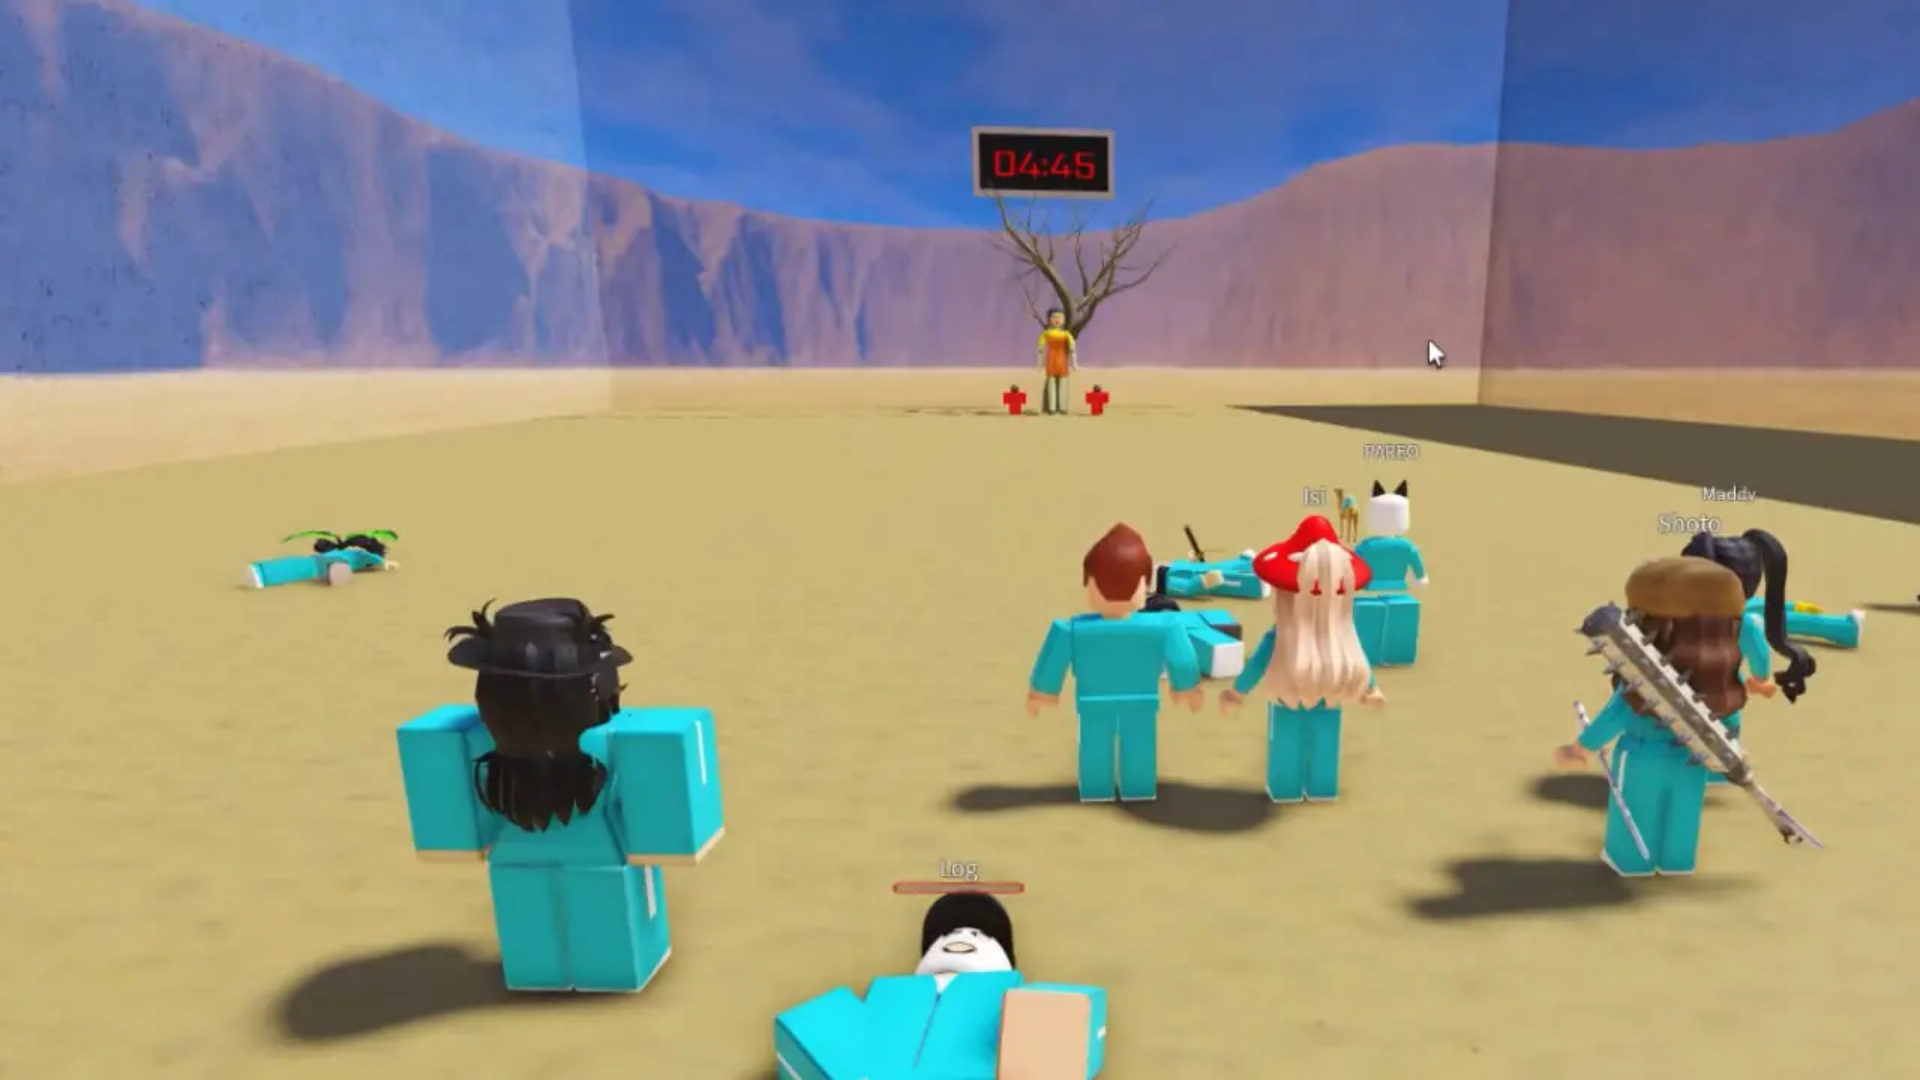 Roblox The Presentation Experience codes for December 2022: Free points and  gems